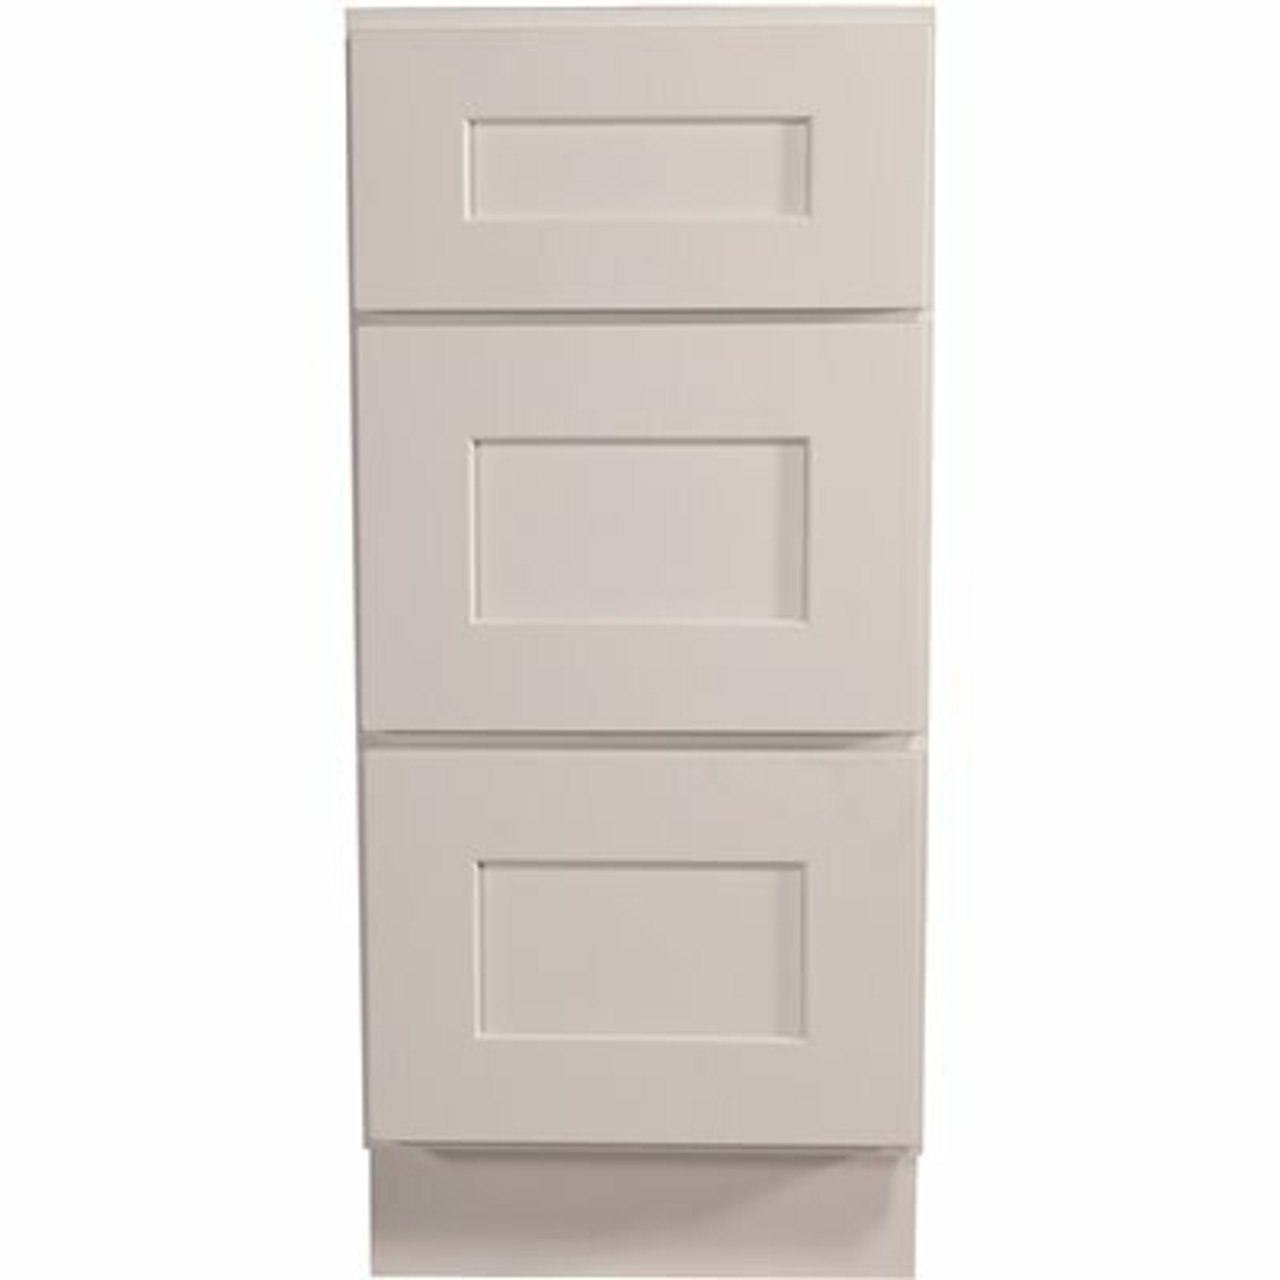 Design House Brookings Plywood Assembled Shaker 12X34.5X24 In. 3-Drawer Base Kitchen Cabinet In White